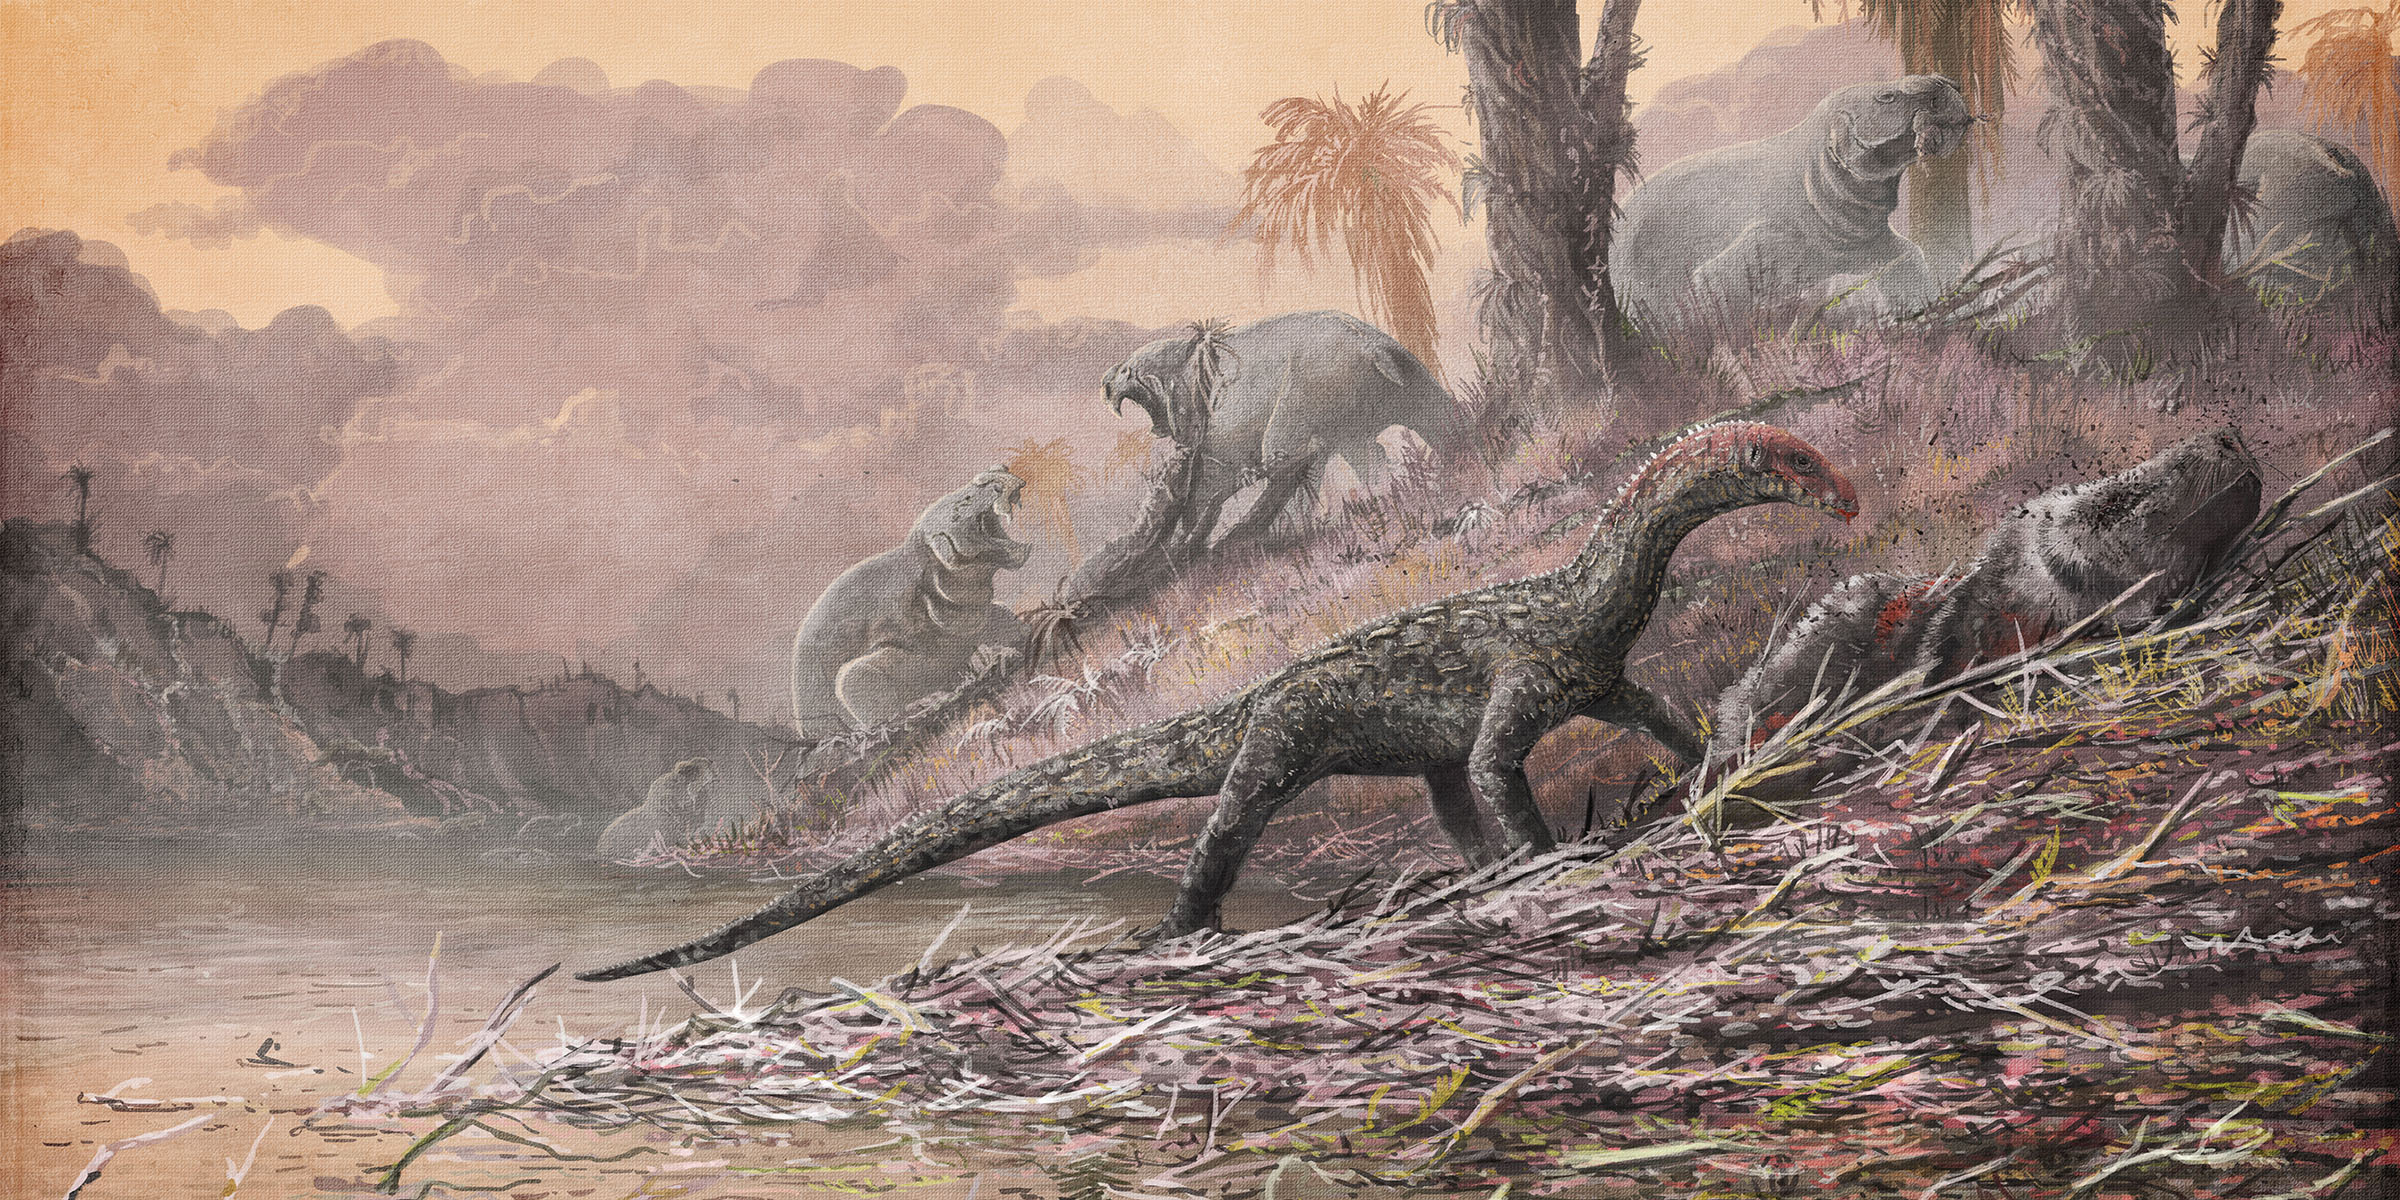 Illustration of prehistoric animals in a wetland area, with a crocodile-like animal in the foreground